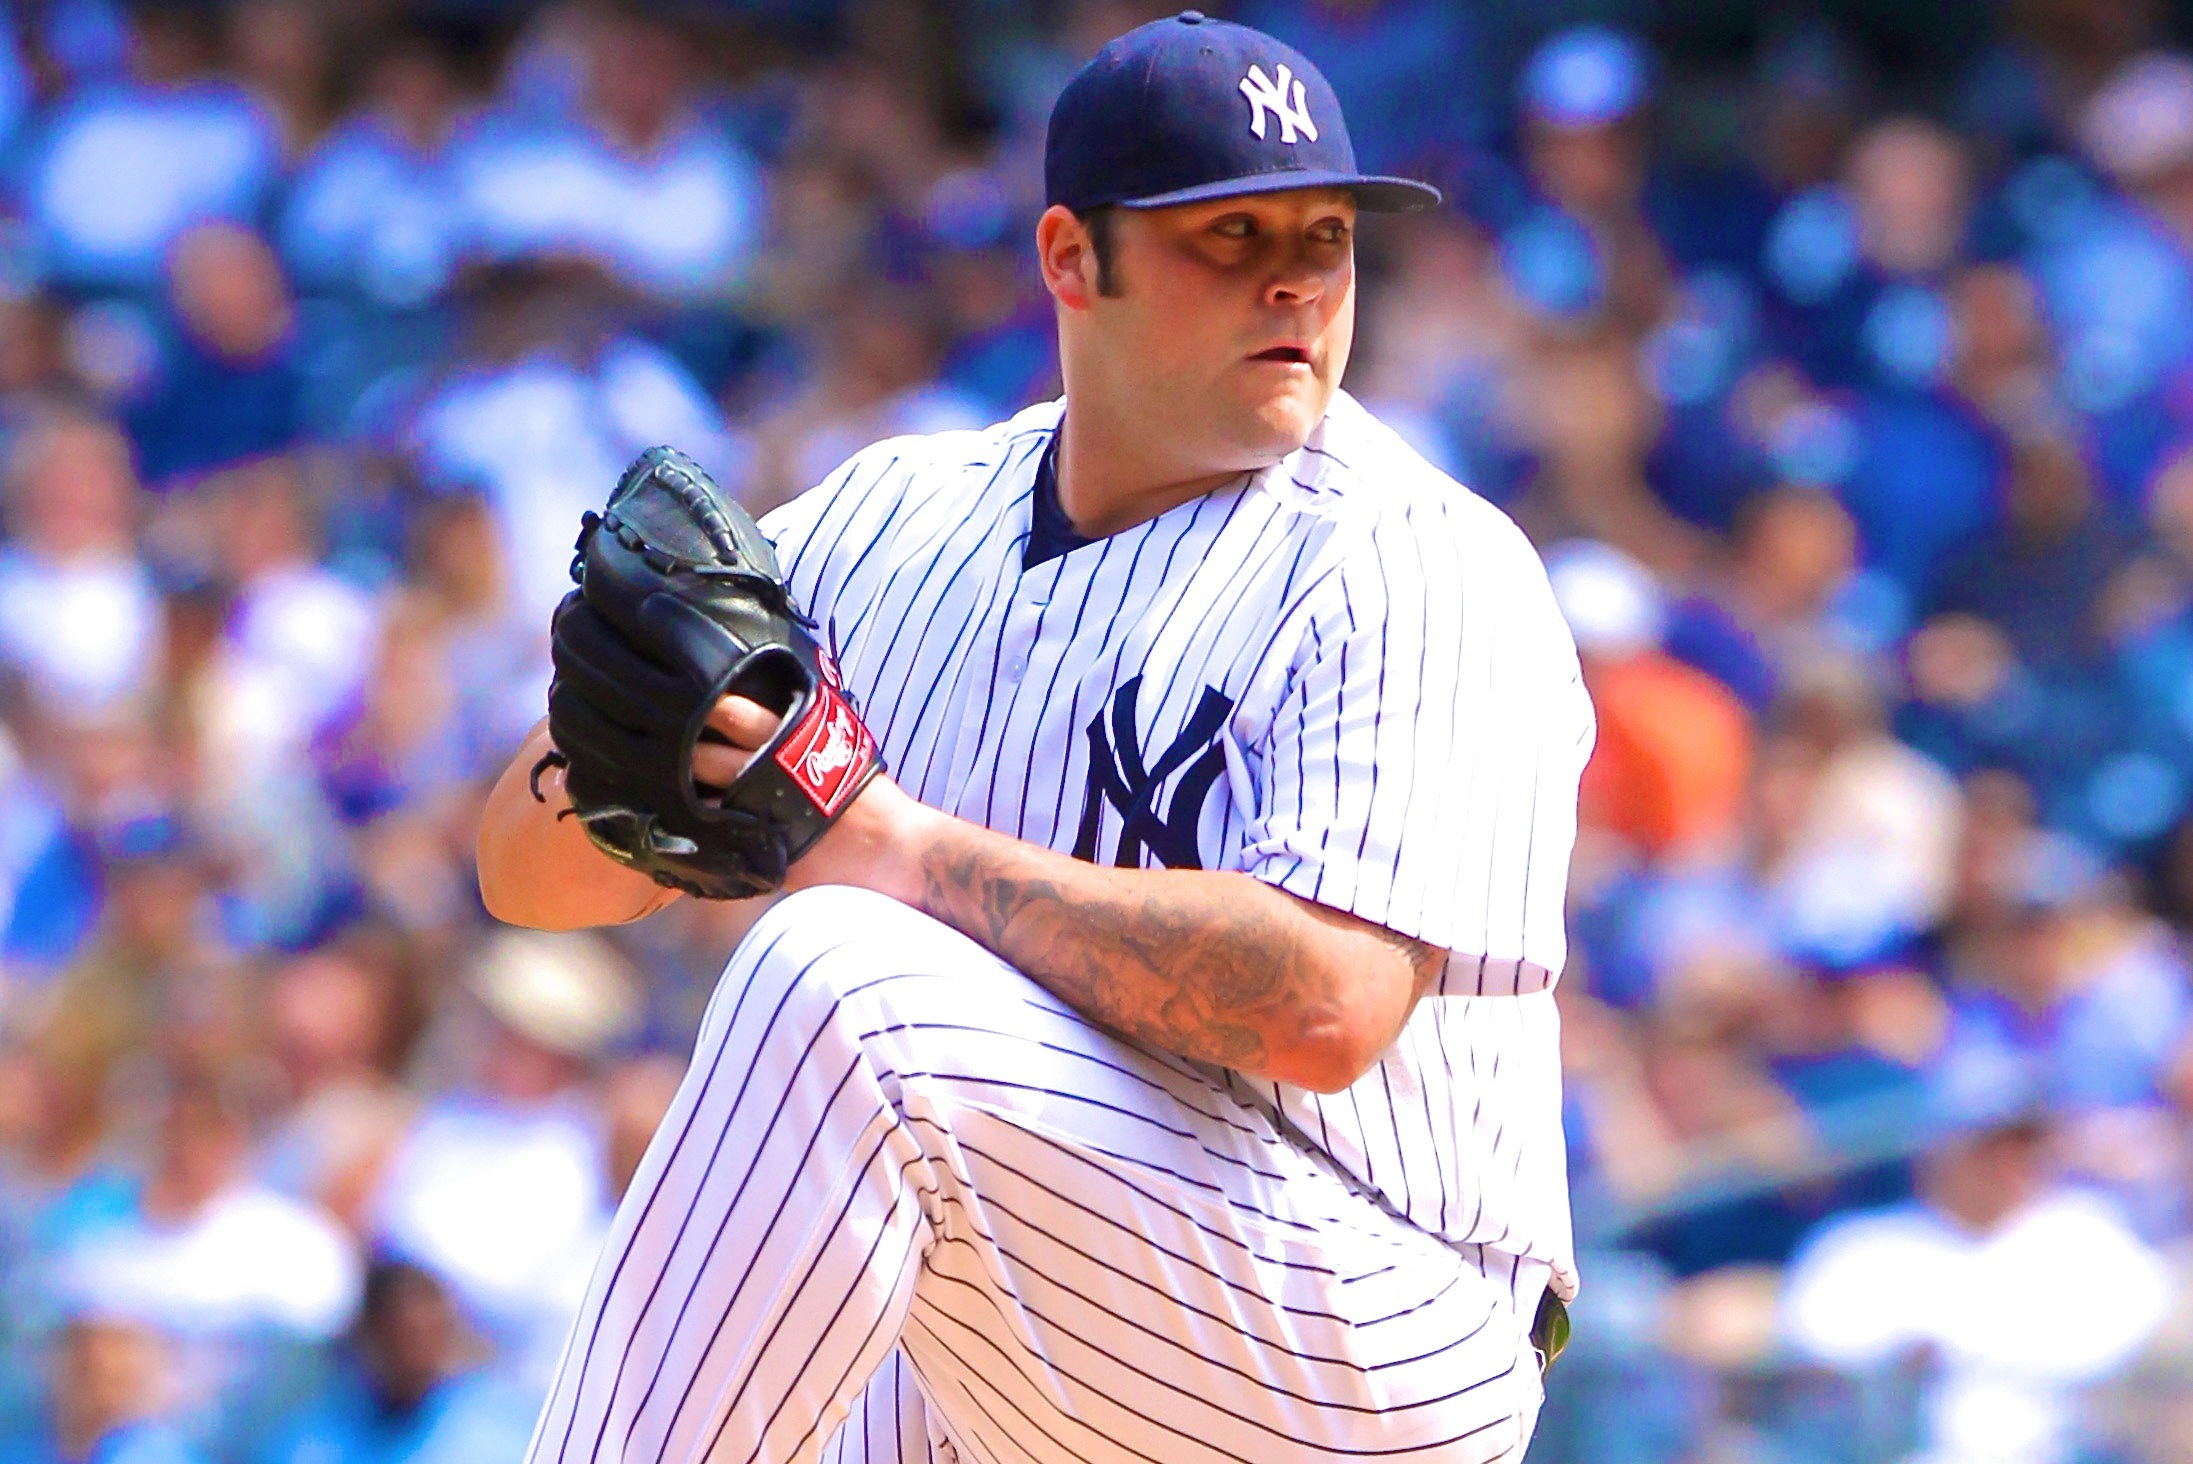 Joba Chamberlain returns to Detroit Tigers for 'unfinished business